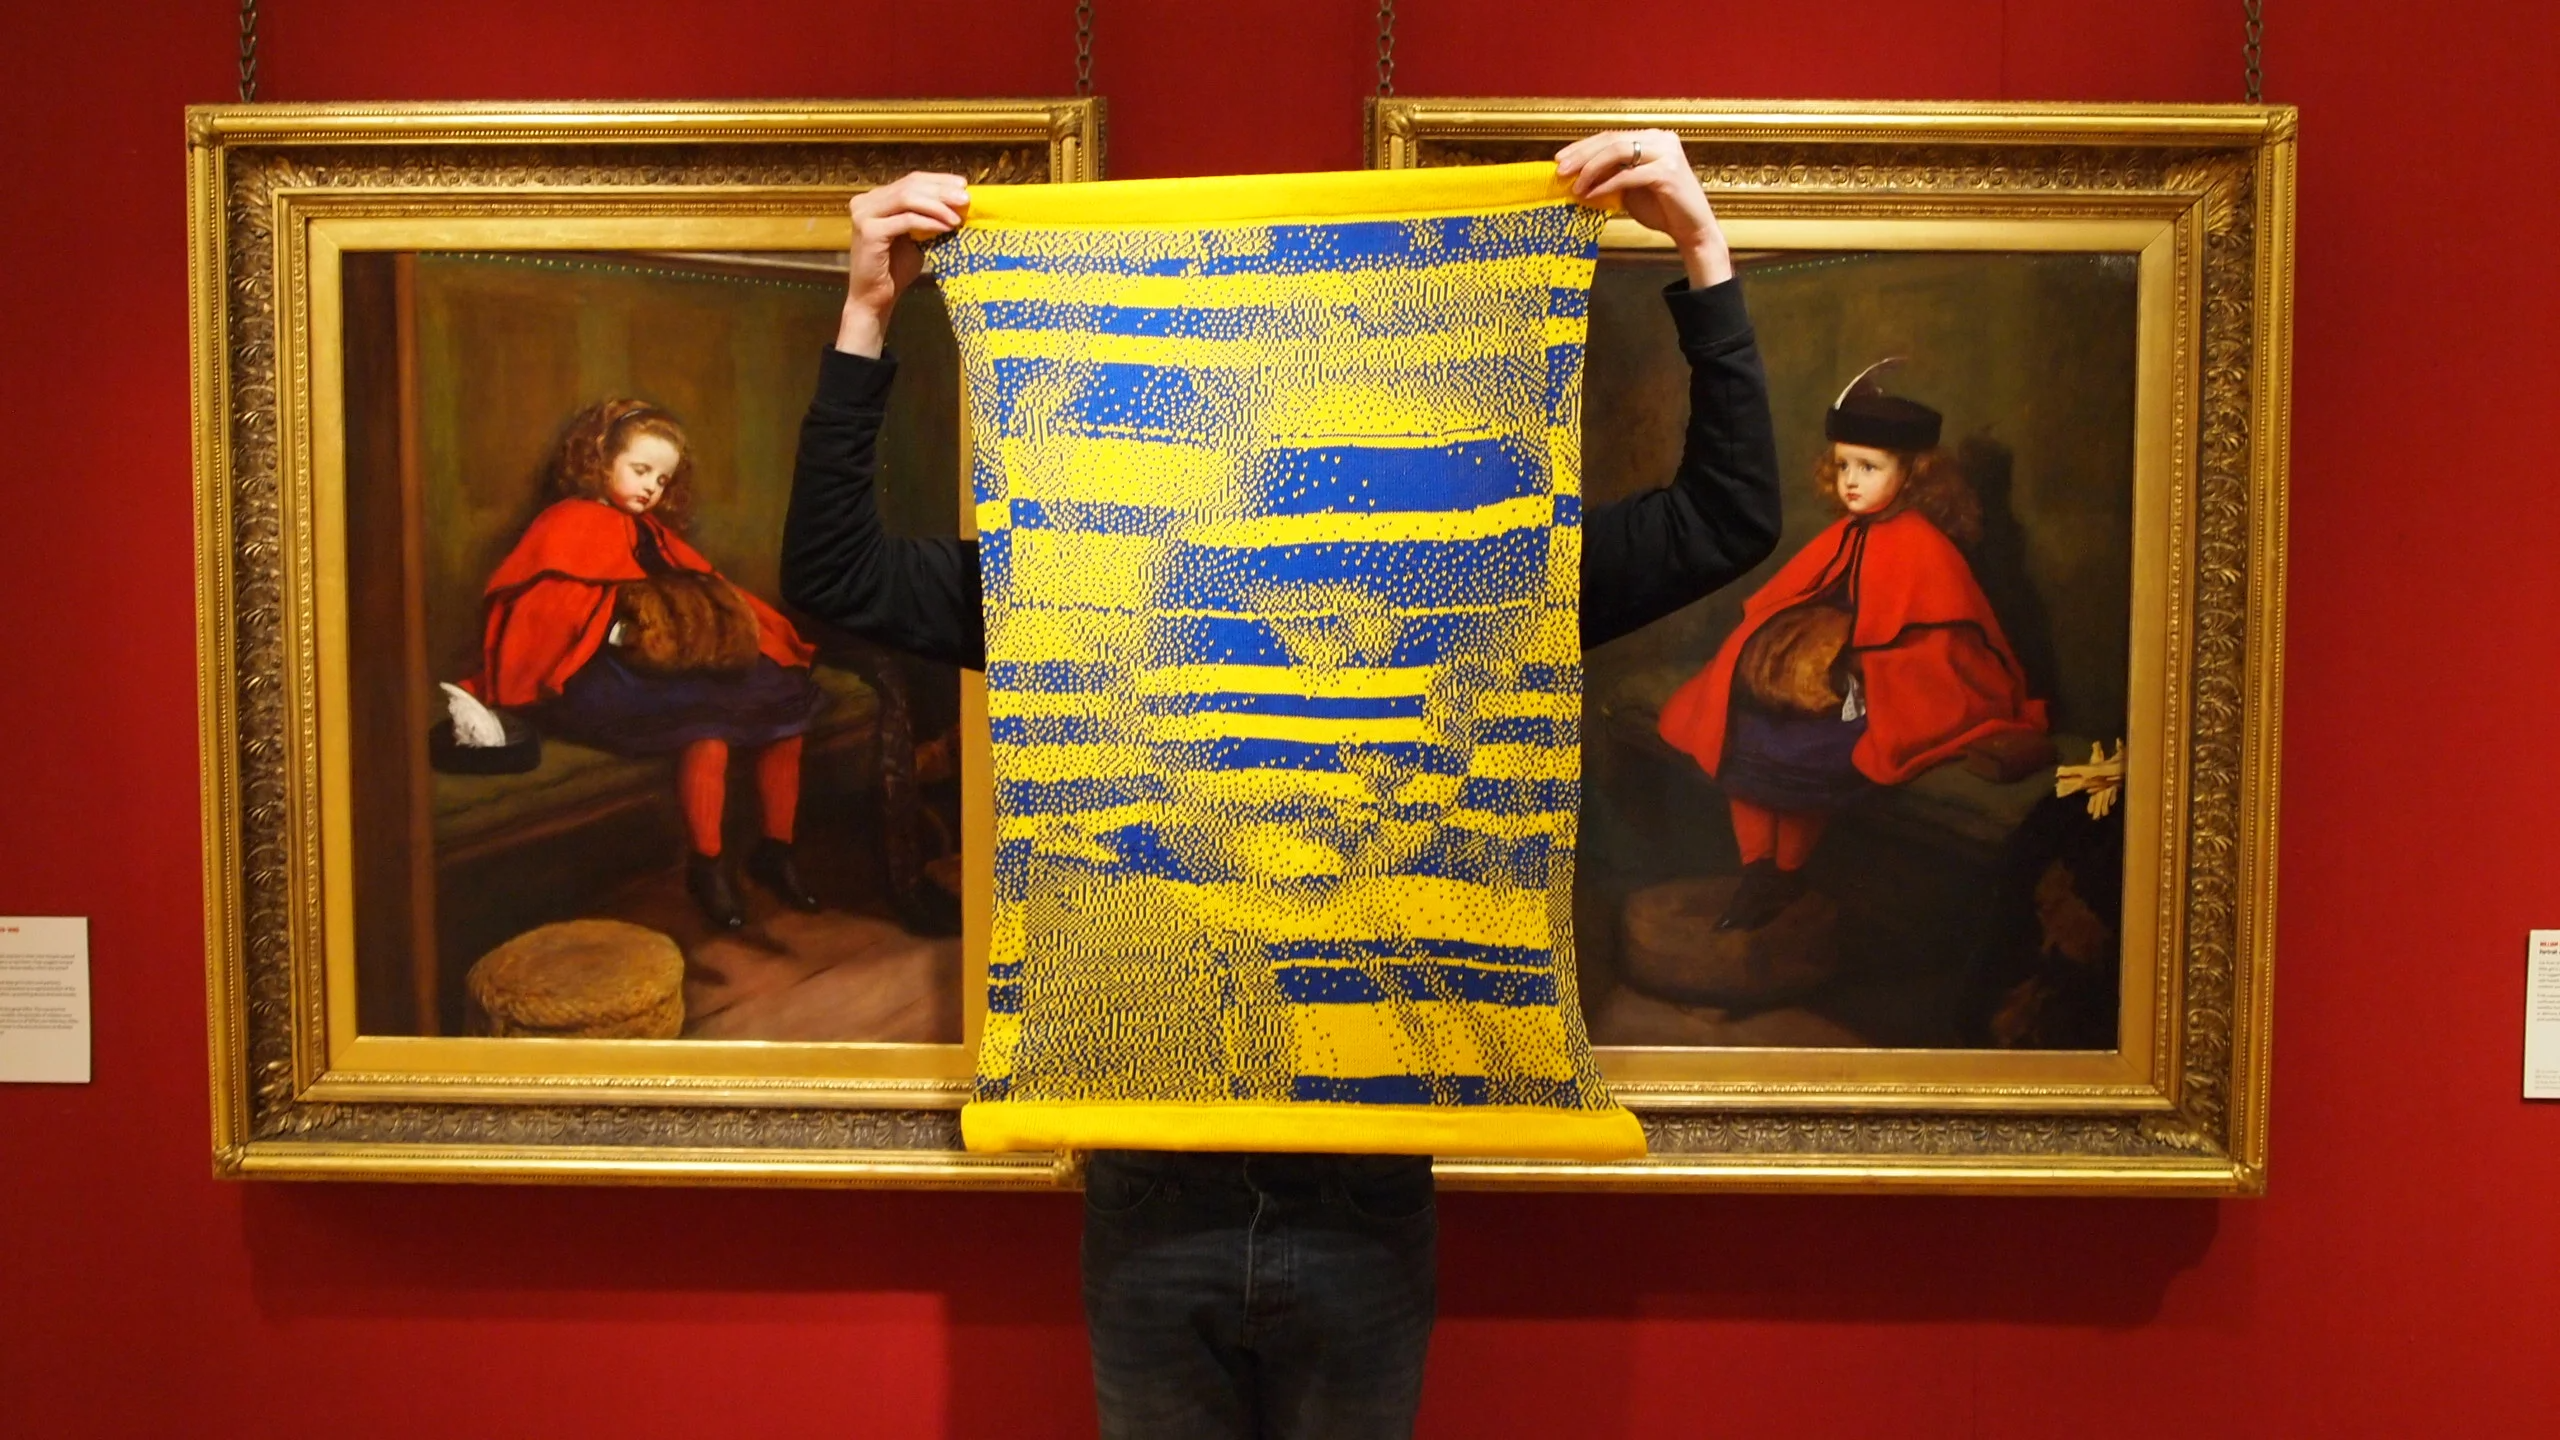 A re-knitsed image of the girl from Sir John Everett Millais's 'My second sermon', blocked out in yellow and blue according to the scores achieved by players throughout London Games Festival